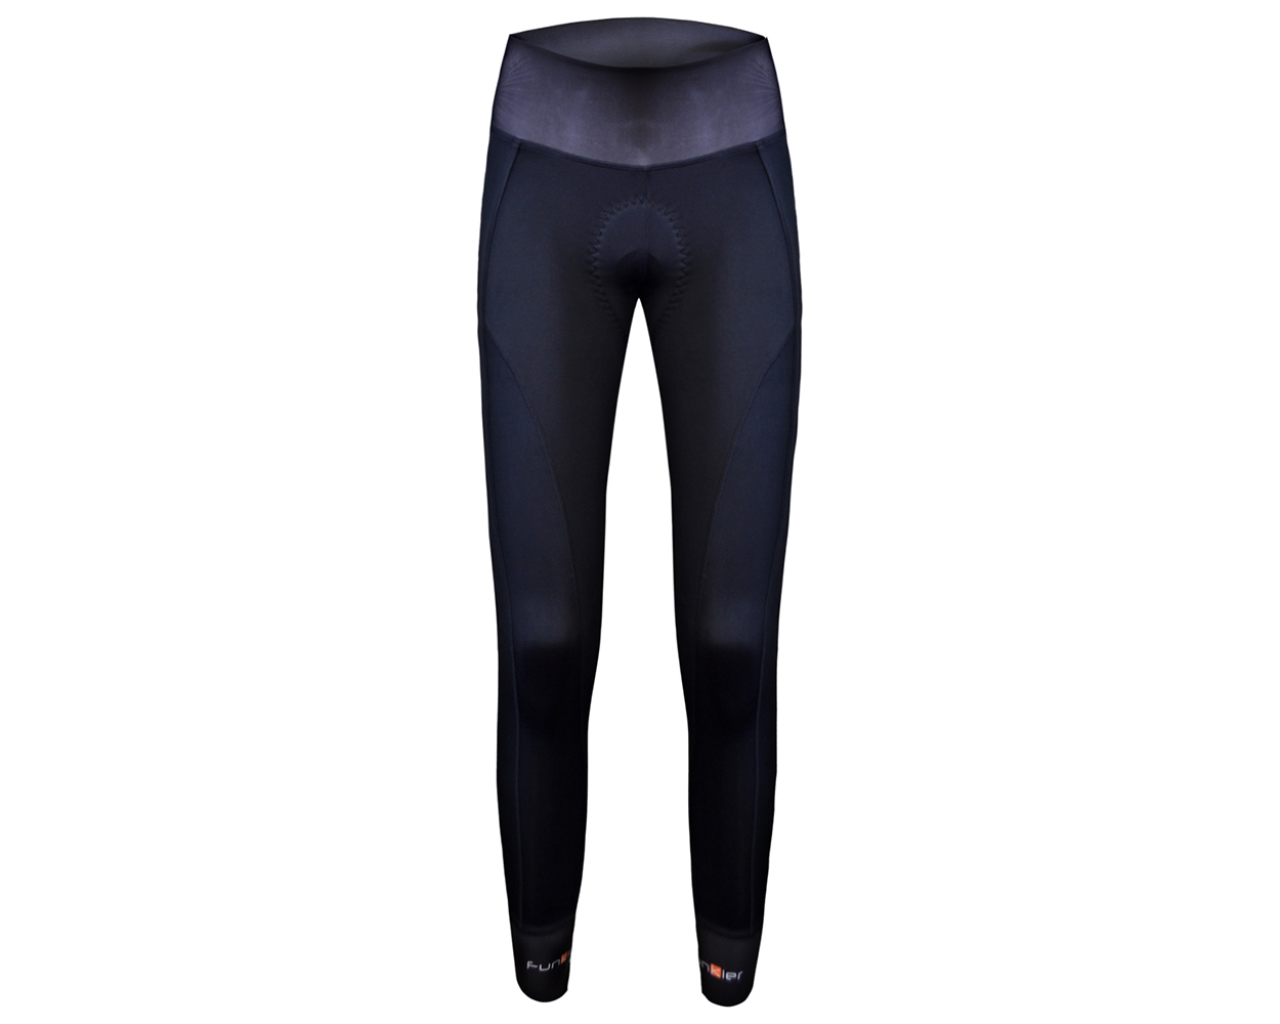 Funkier Polesse Pro Microfleece Ladies Tights with Pad | Merlin Cycles